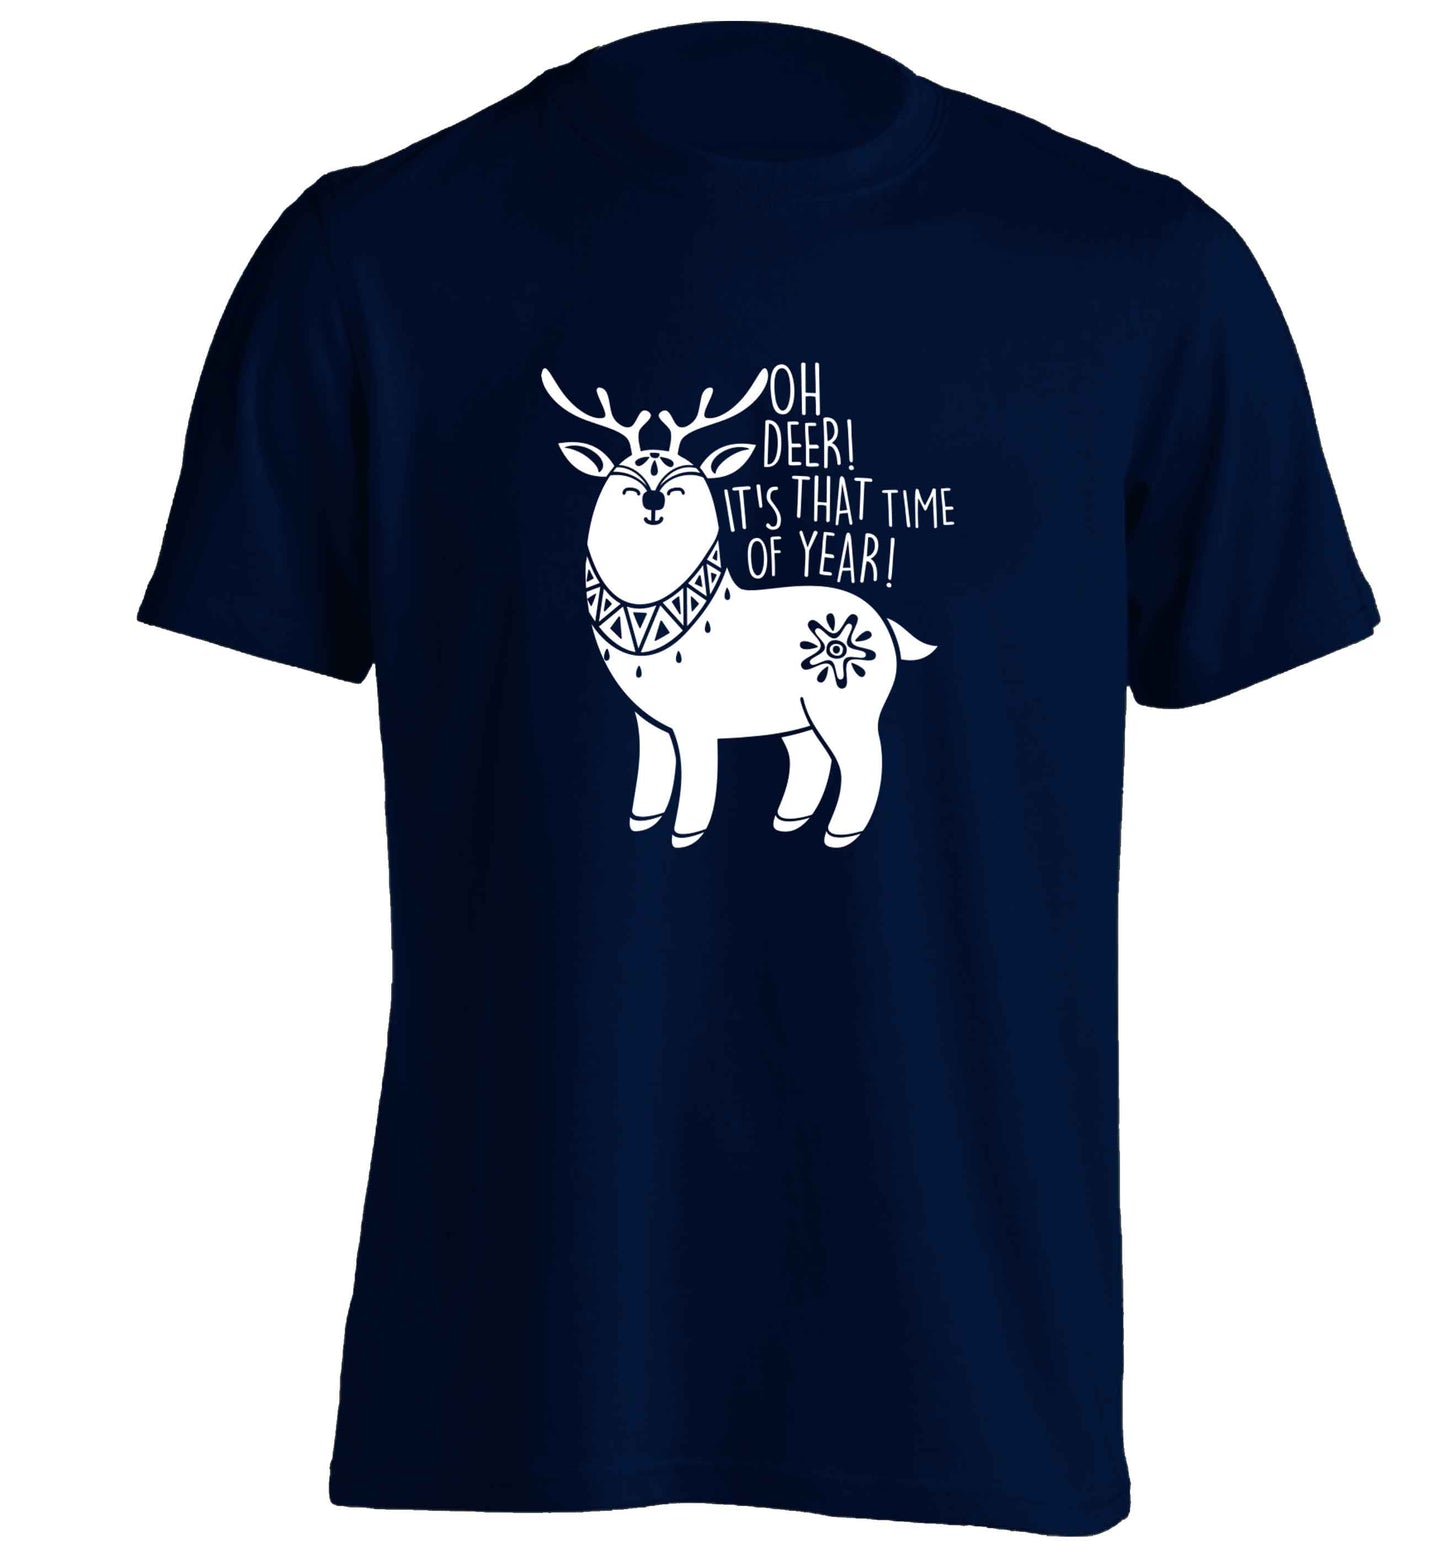 Oh dear it's that time of year adults unisex navy Tshirt 2XL